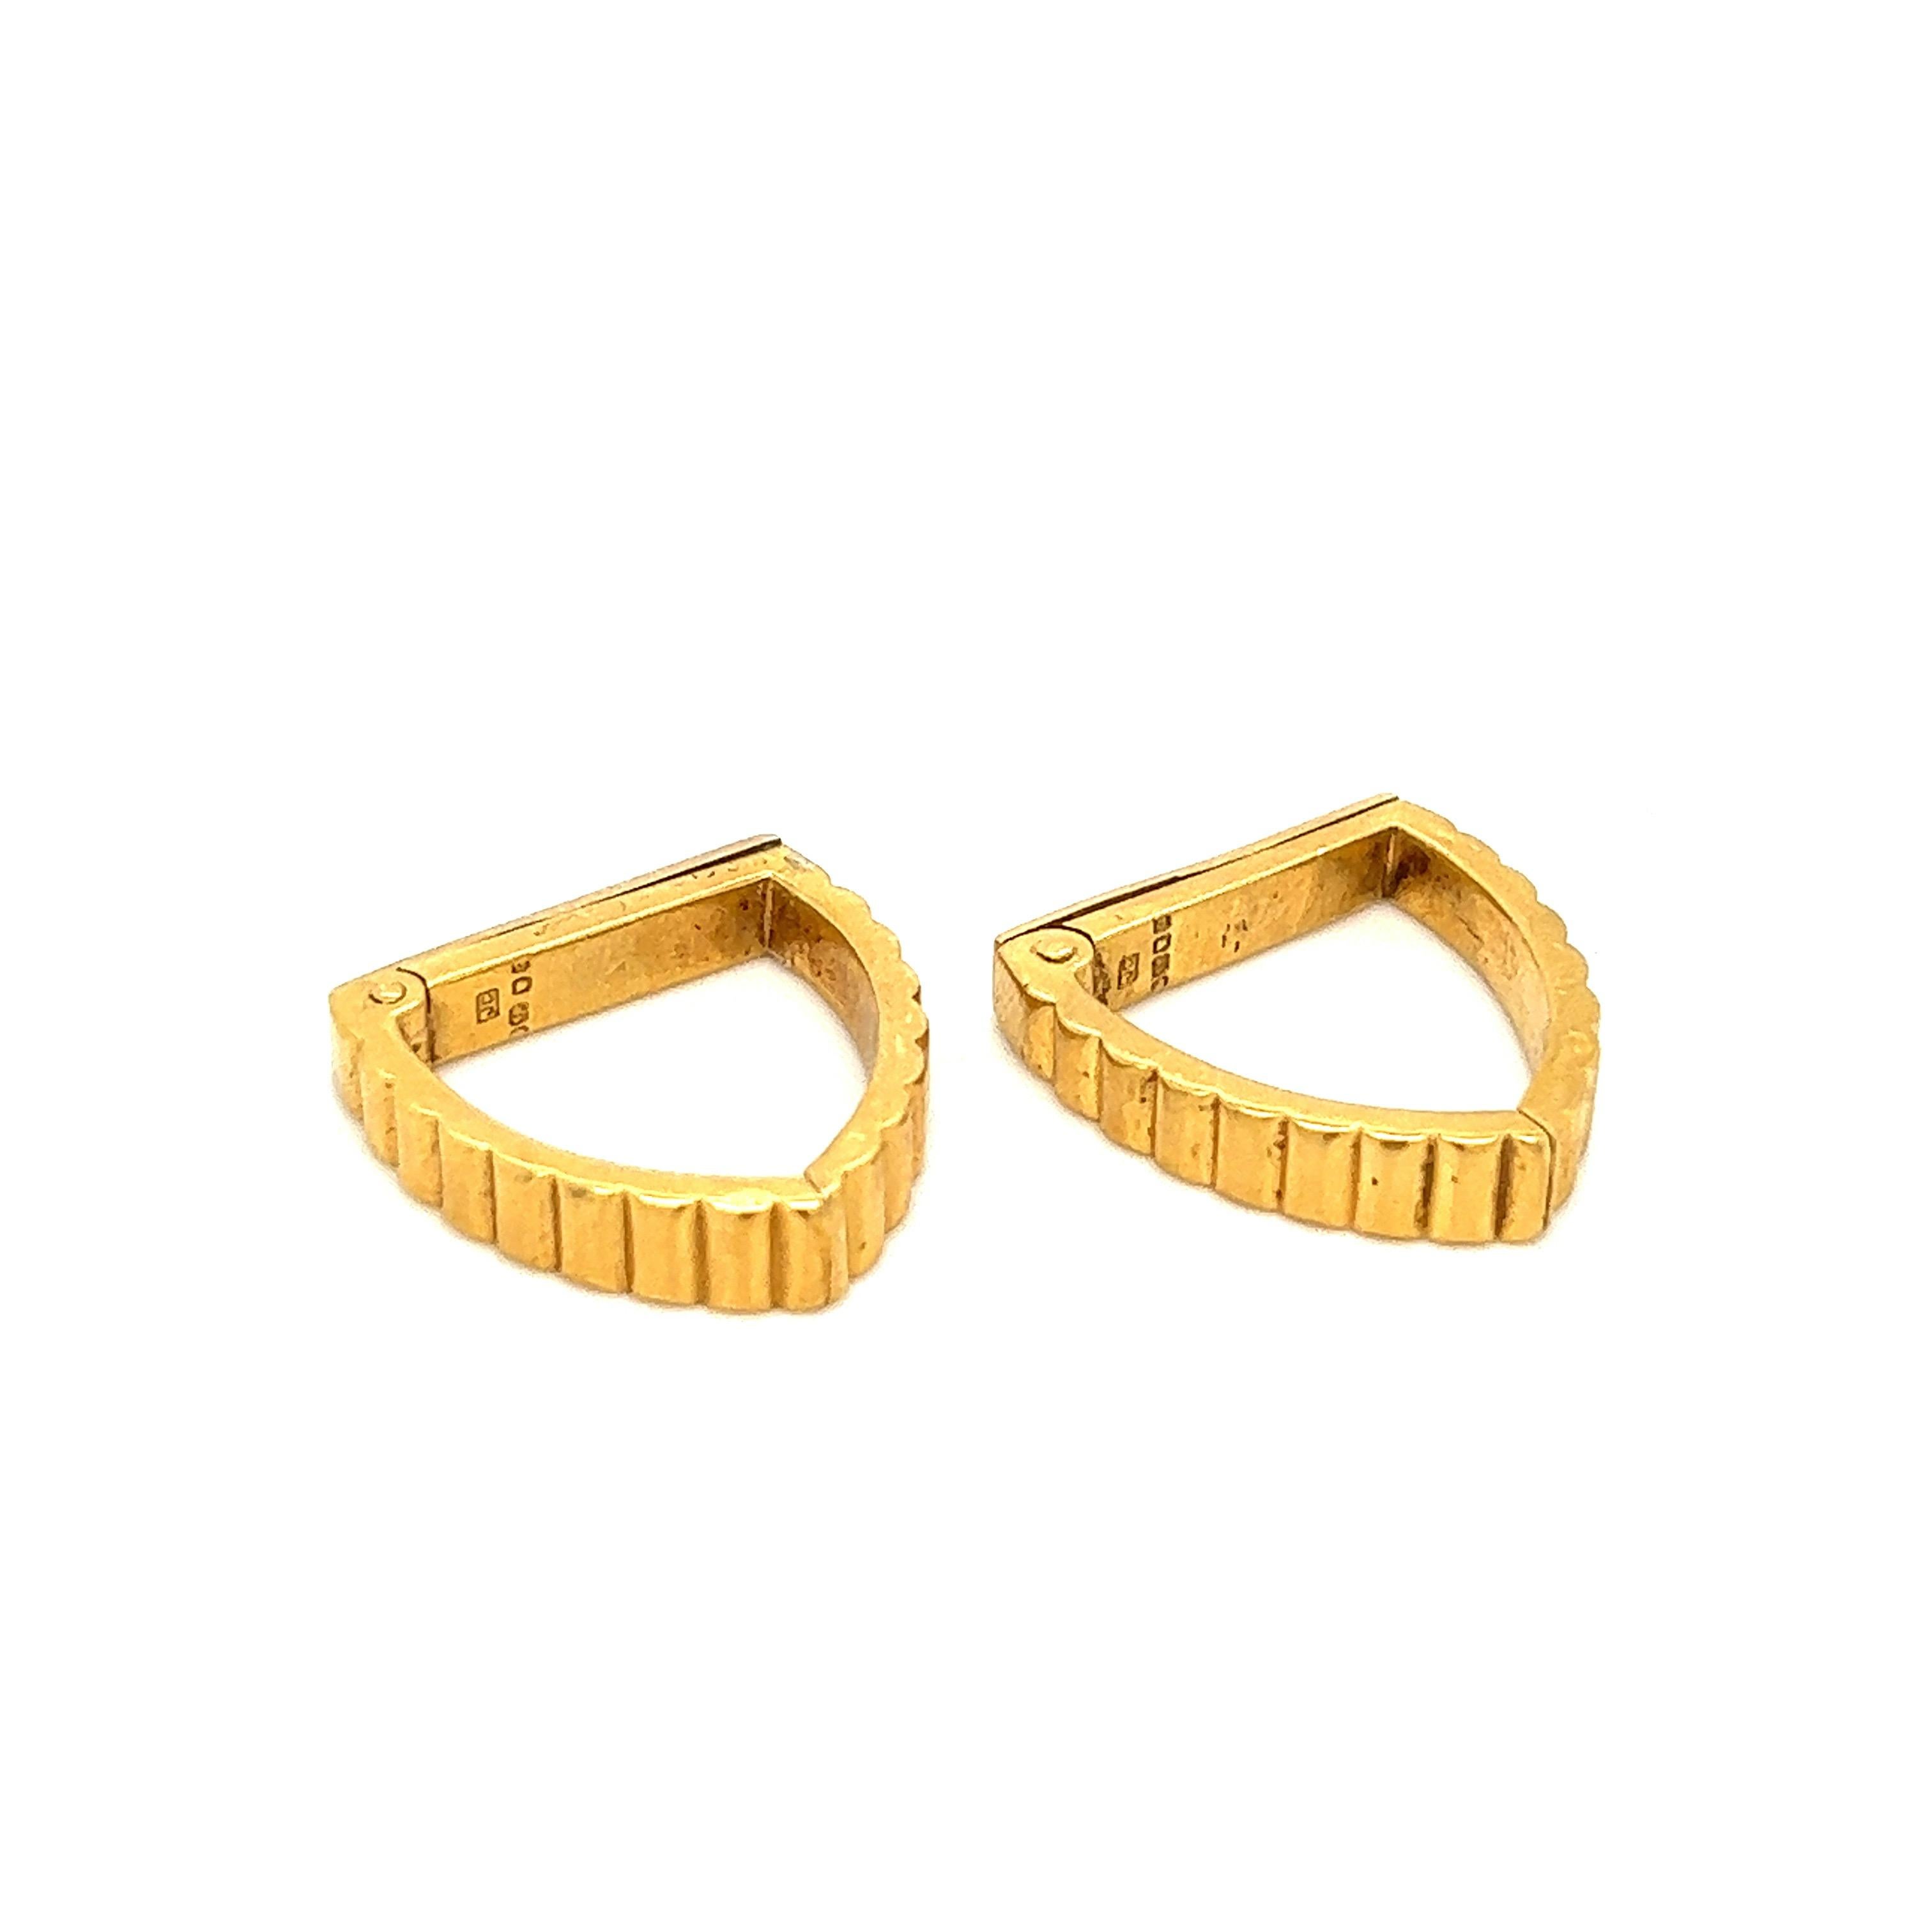 Cartier gold cufflinks, circa 1950s

English and French assay marks, 18 karat yellow gold; marked Cartier, 18 

Size: width 1.7 cm, length 2 cm
Total weight: 14.3 grams 